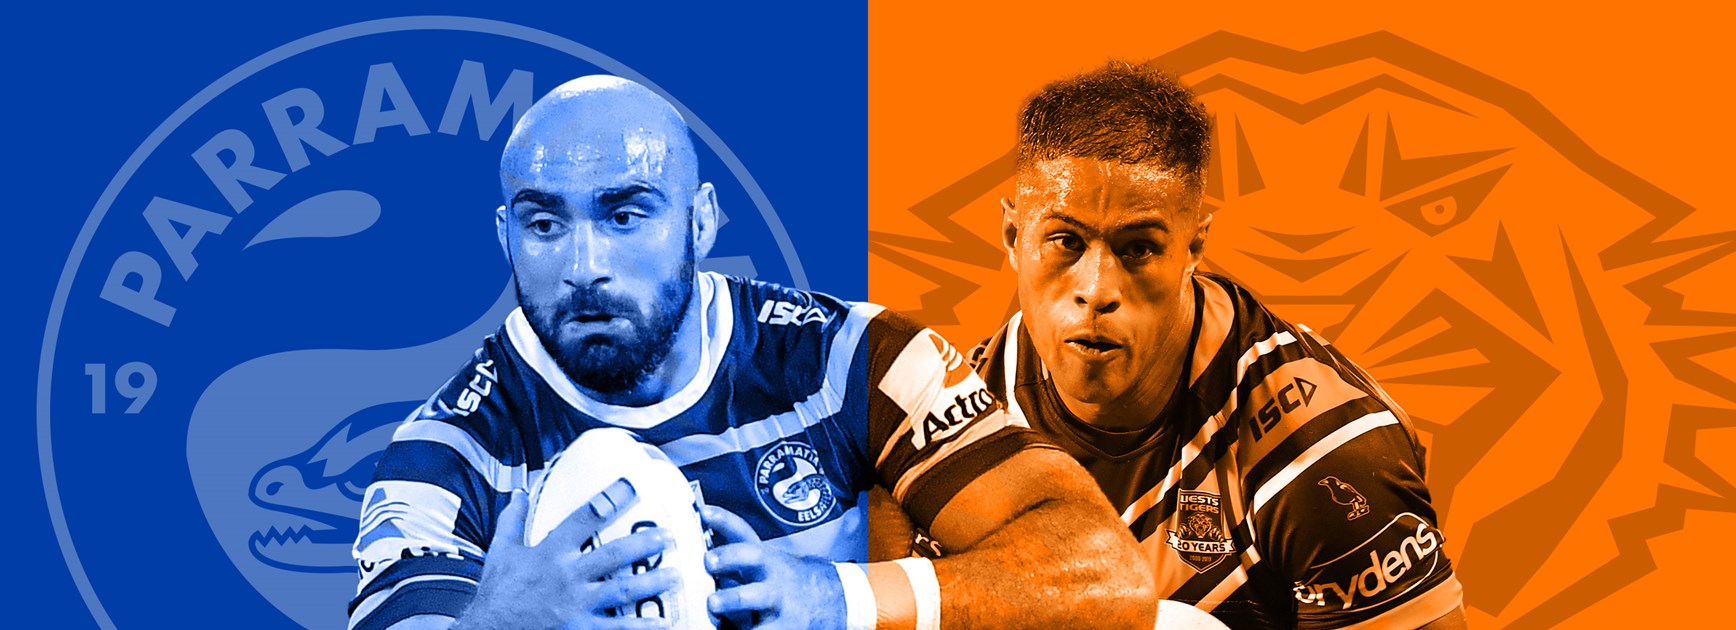 Match Preview: Eels v Wests Tigers, Bankwest Stadium, Round Six